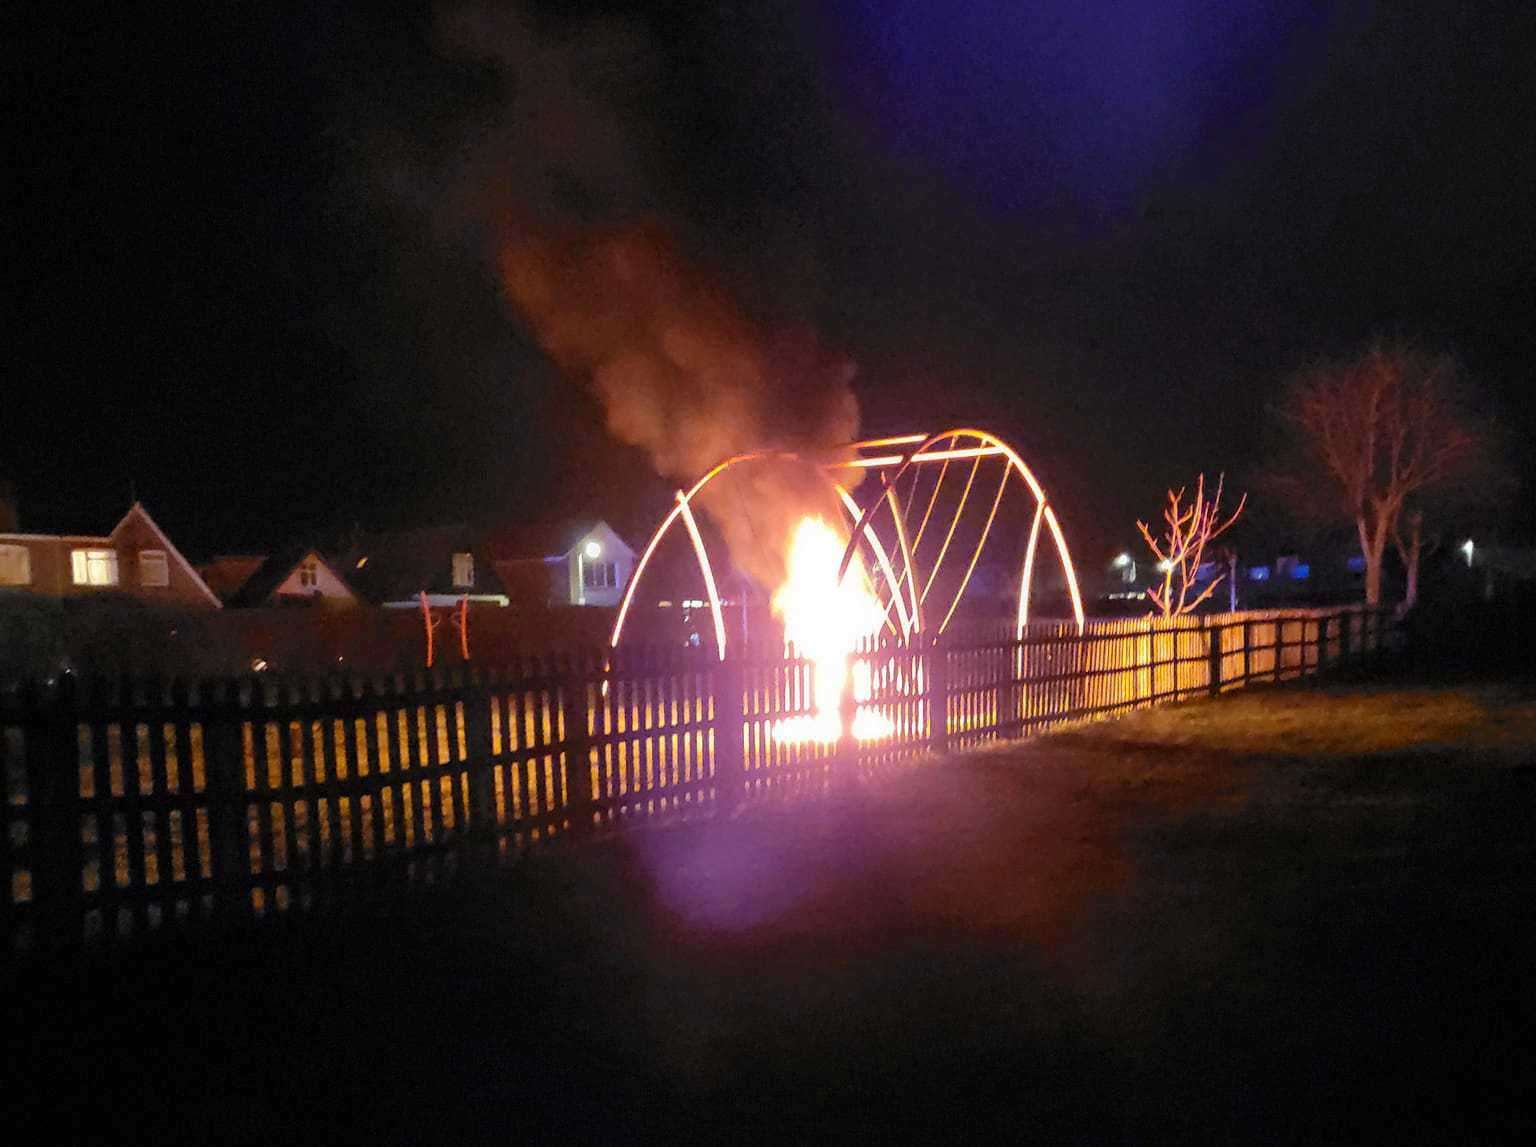 Fire at a park in Wheatley Road, Whitstable.